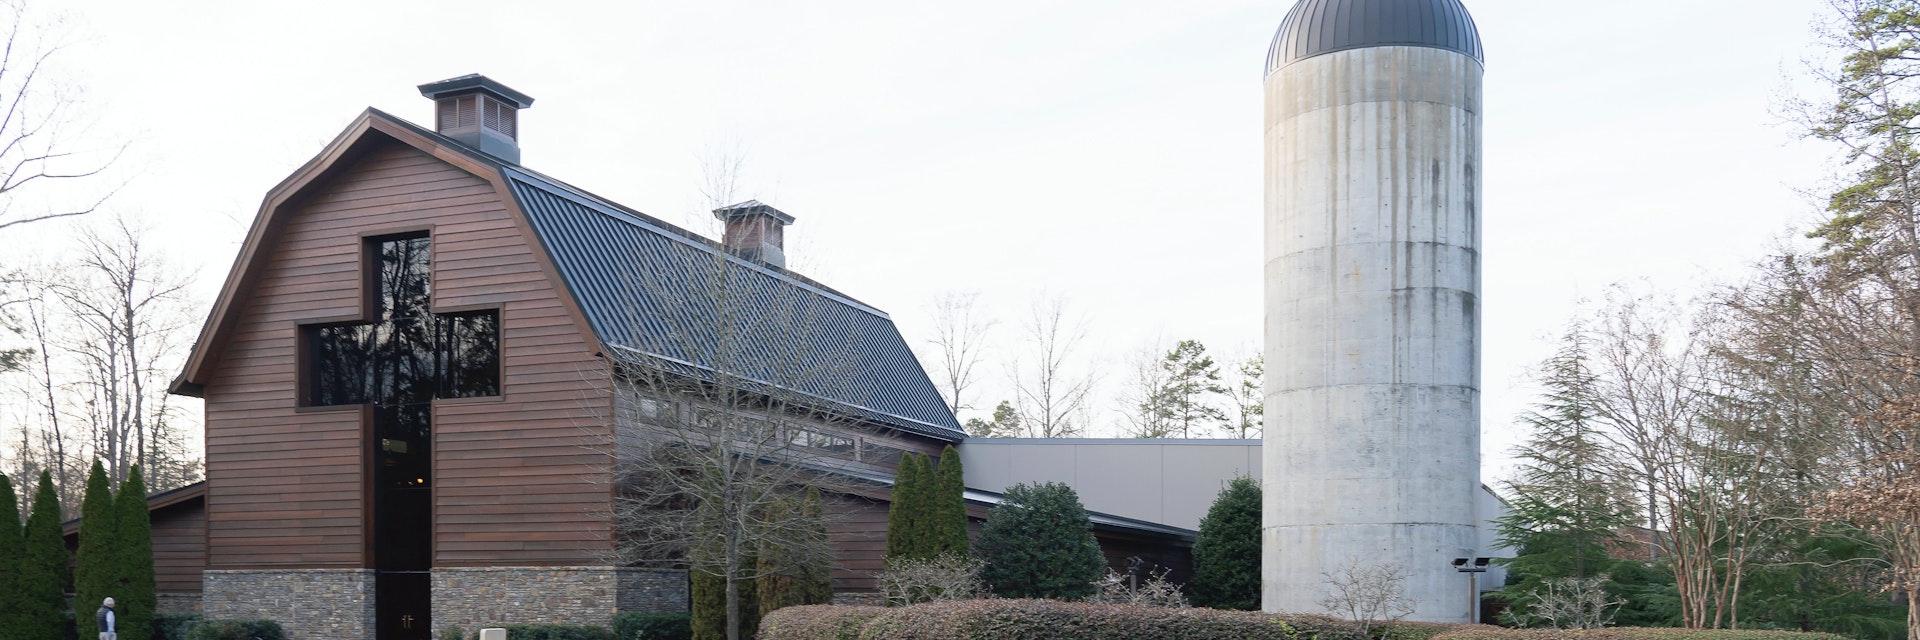 Charlotte, North Carolina, USA - January 15, 2020: The Billy Graham Library in Charlotte, North Carolina, a museum and library documenting the life and ministry of Christian evangelist Billy Graham.